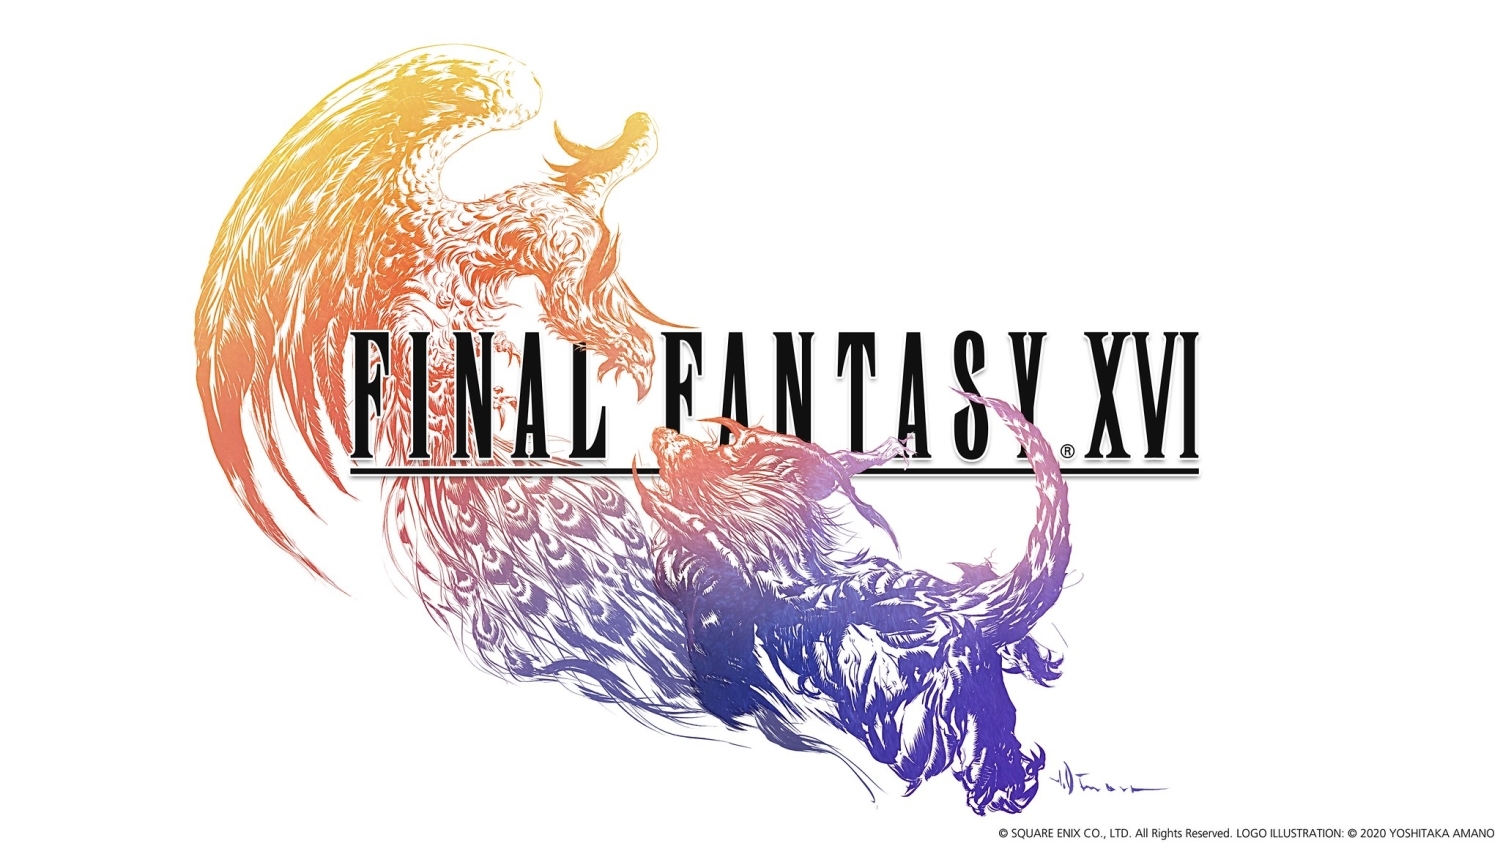 Final Fantasy XVI PS5 Exclusive Because Sony Co-Developed The Game and Can  Better Market It